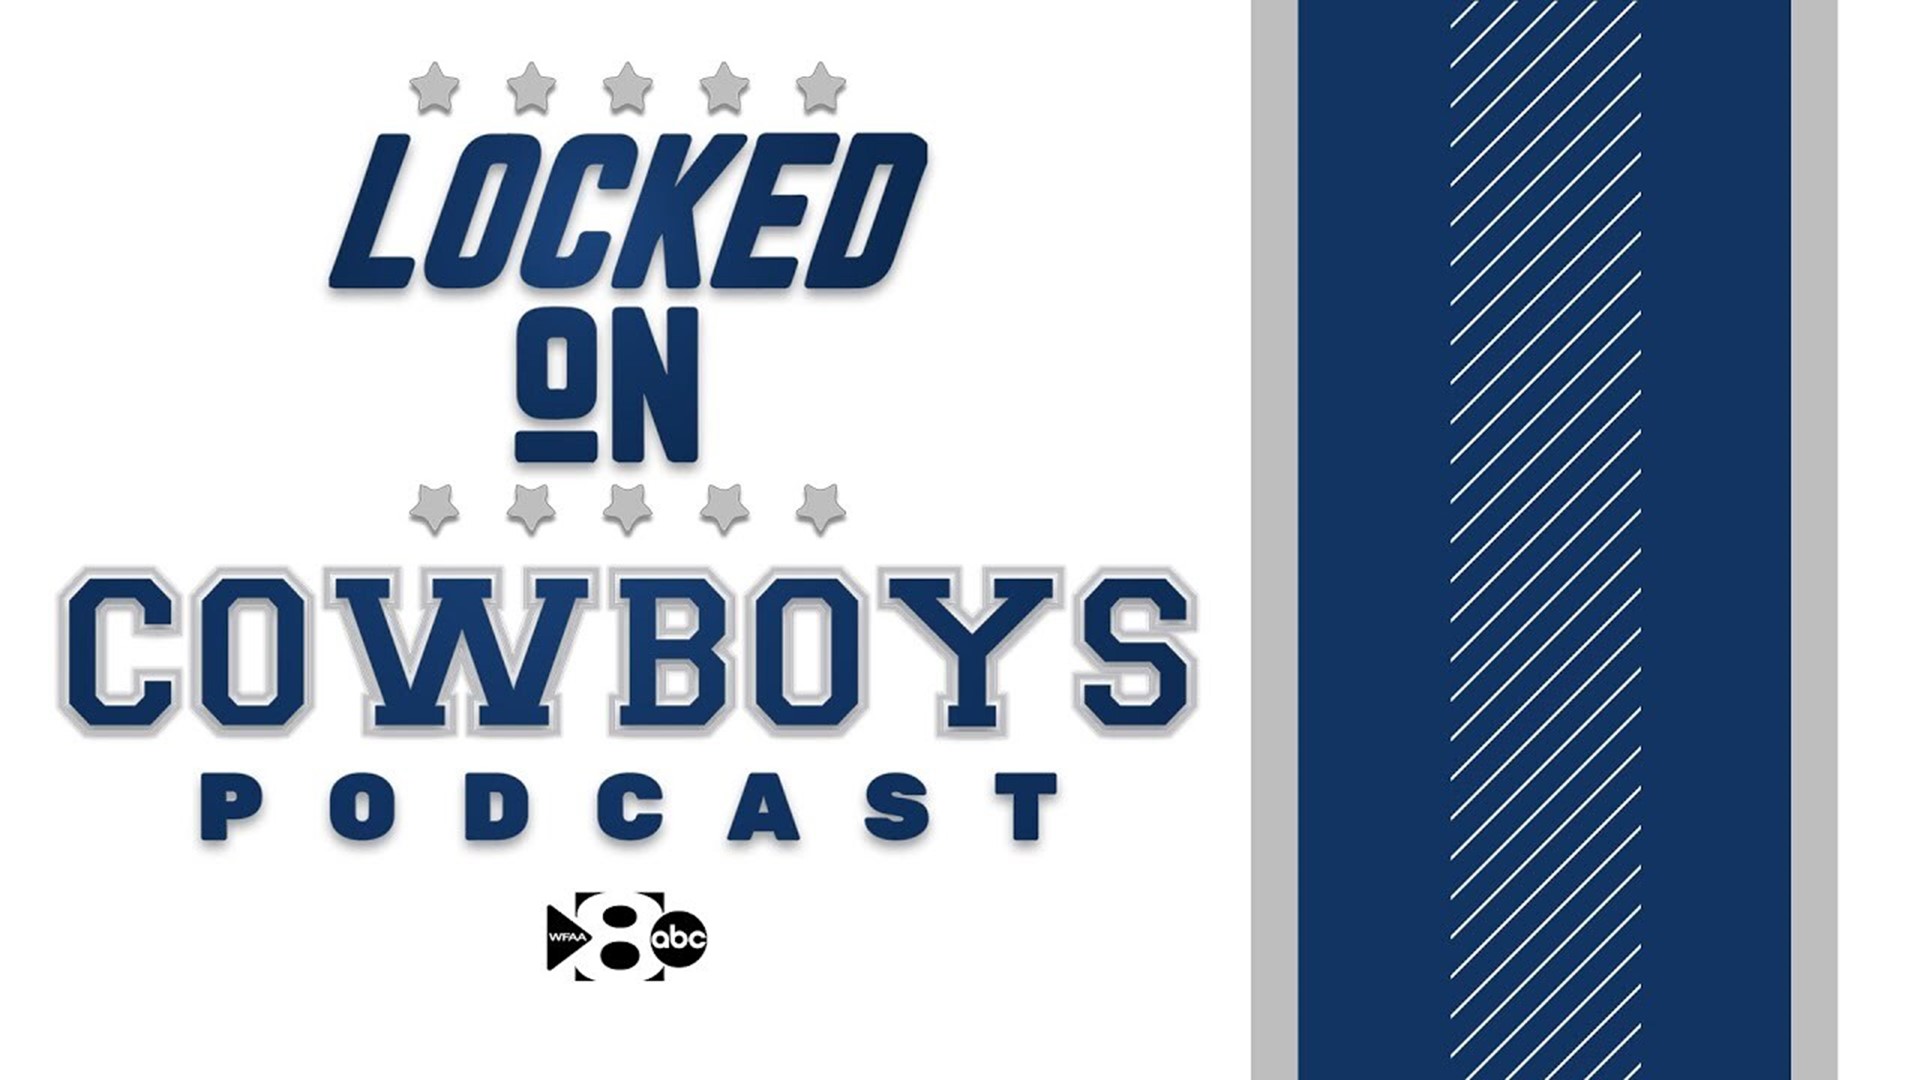 In this episode of the Locked On Cowboys Podcast, Marcus Mosher and Landon McCool answer Twitter questions ahead of the 2021 NFL Draft.